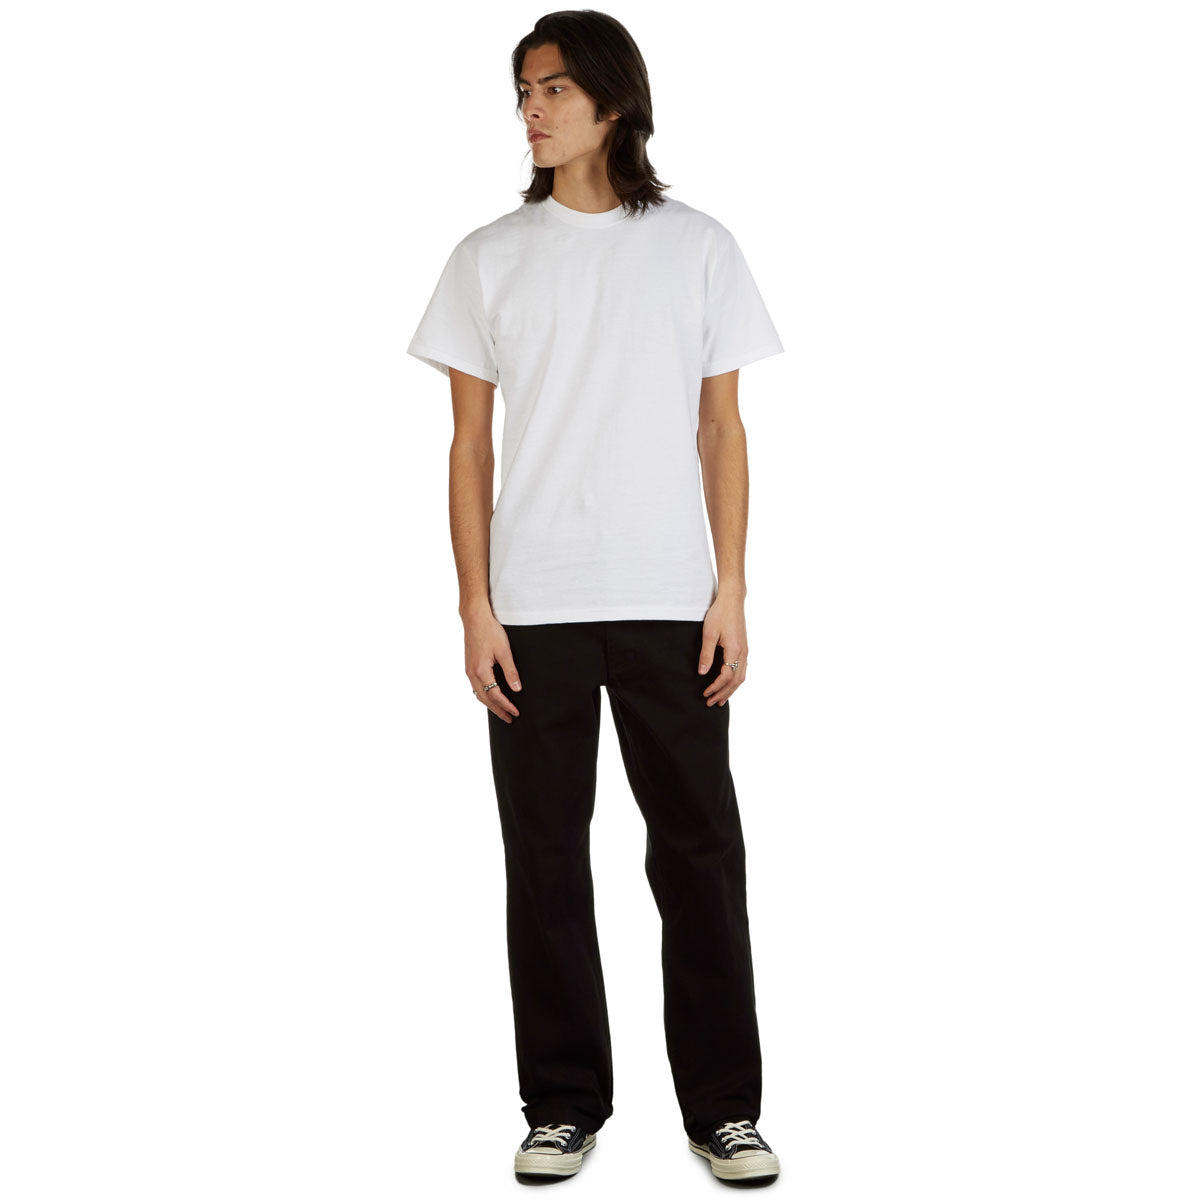 CCS Standard Plus Relaxed Chino Pants - Black image 2